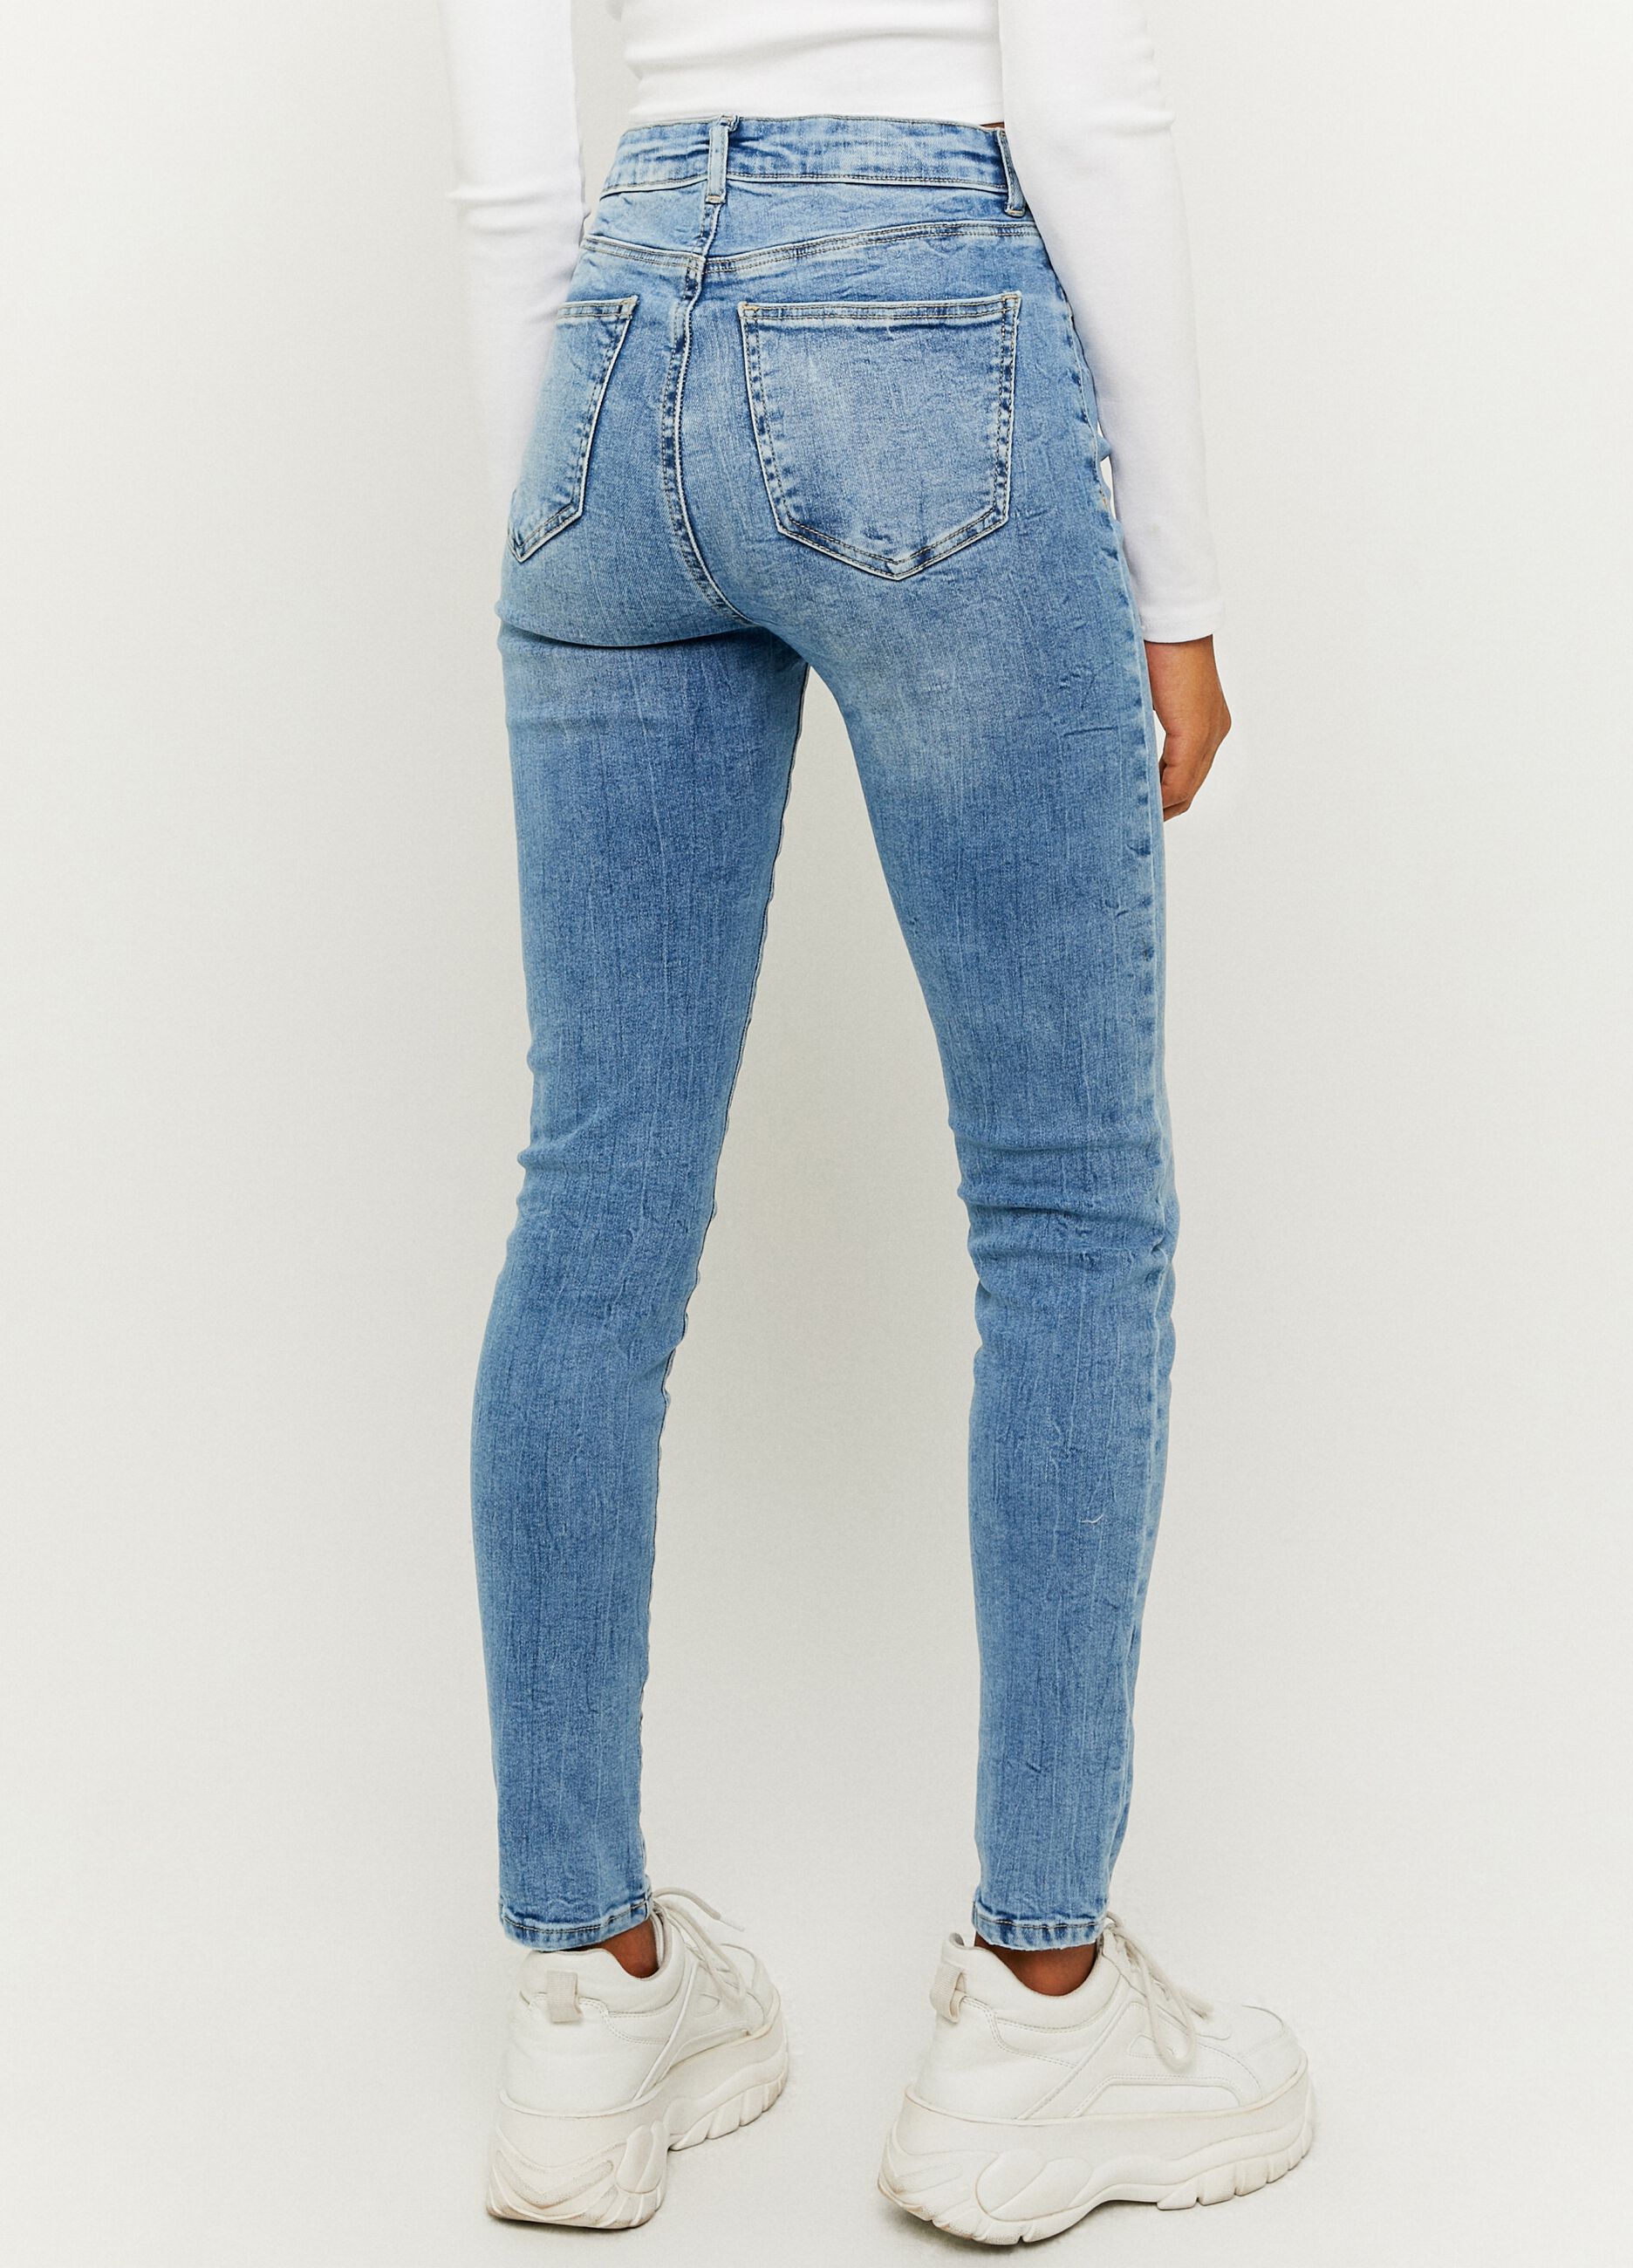 Skinny jeans with high waist